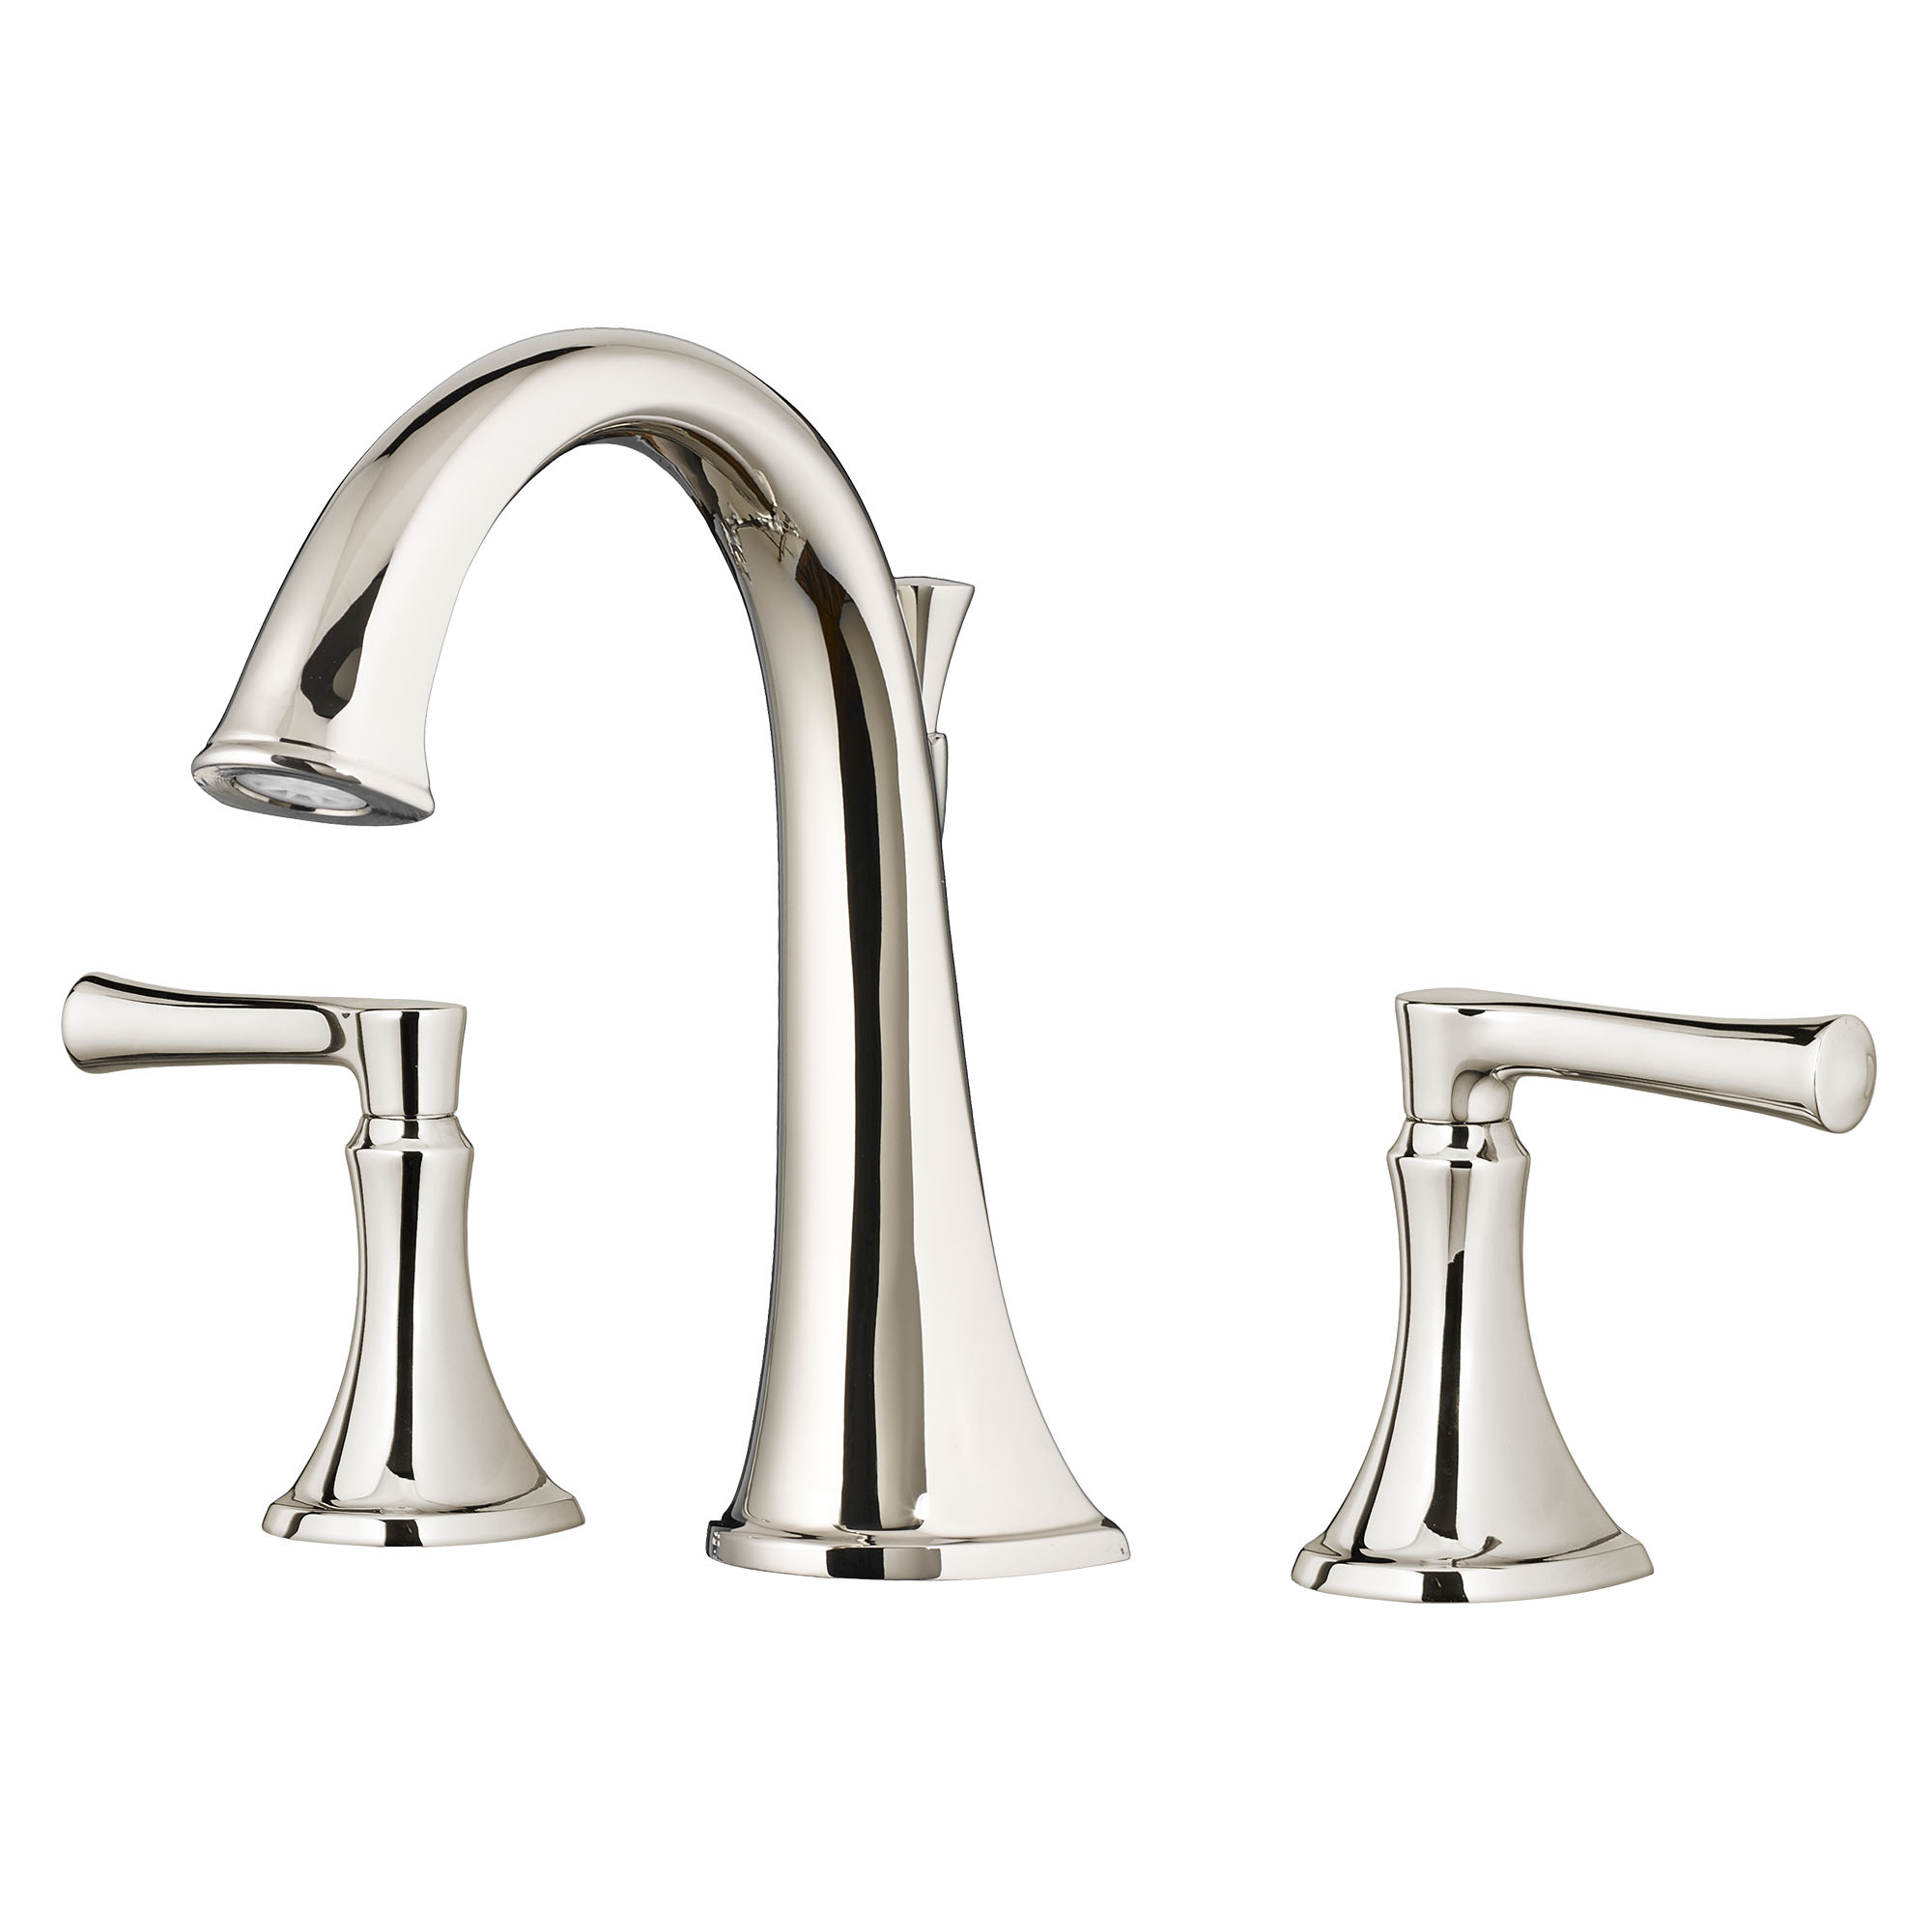 Estate Bathtub Faucet for Flash Rough-in Valve with Lever Handles